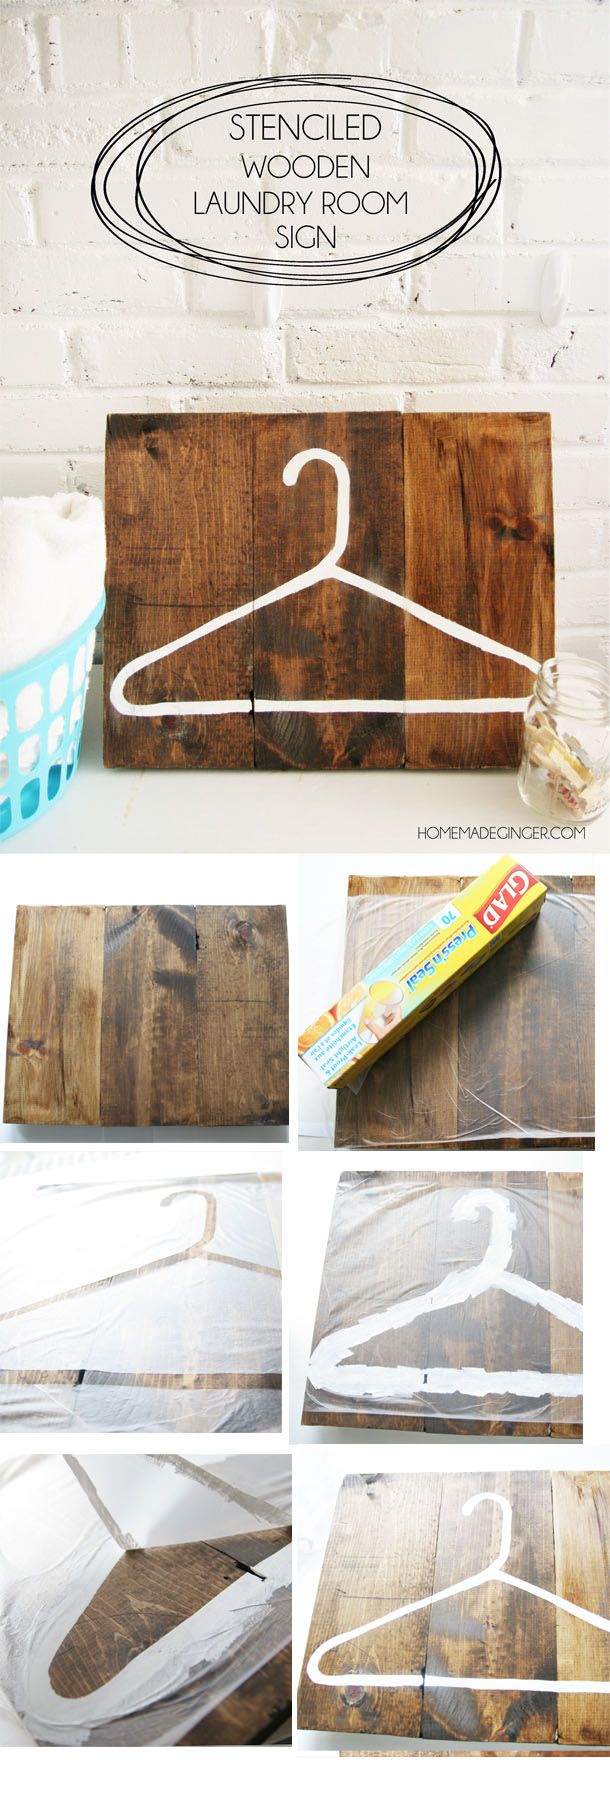 Make a stenciled wooden sign using Glad Press'n Seal! It's so easy and t...